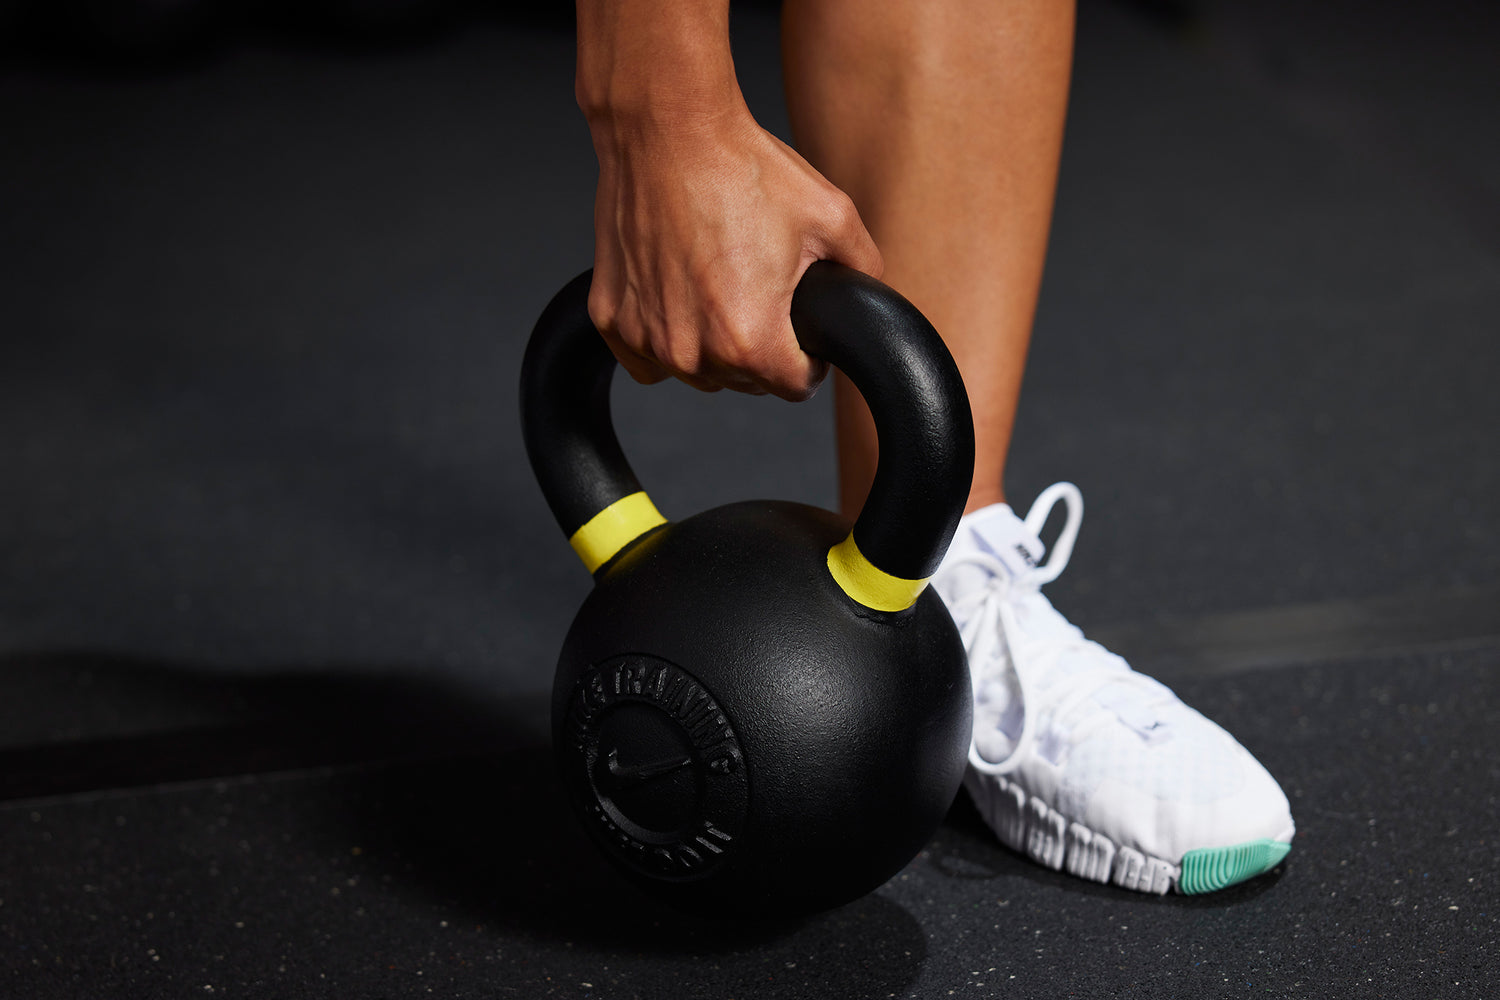 Athlete grabbing the handle for the Nike Kettlebell 35 LB